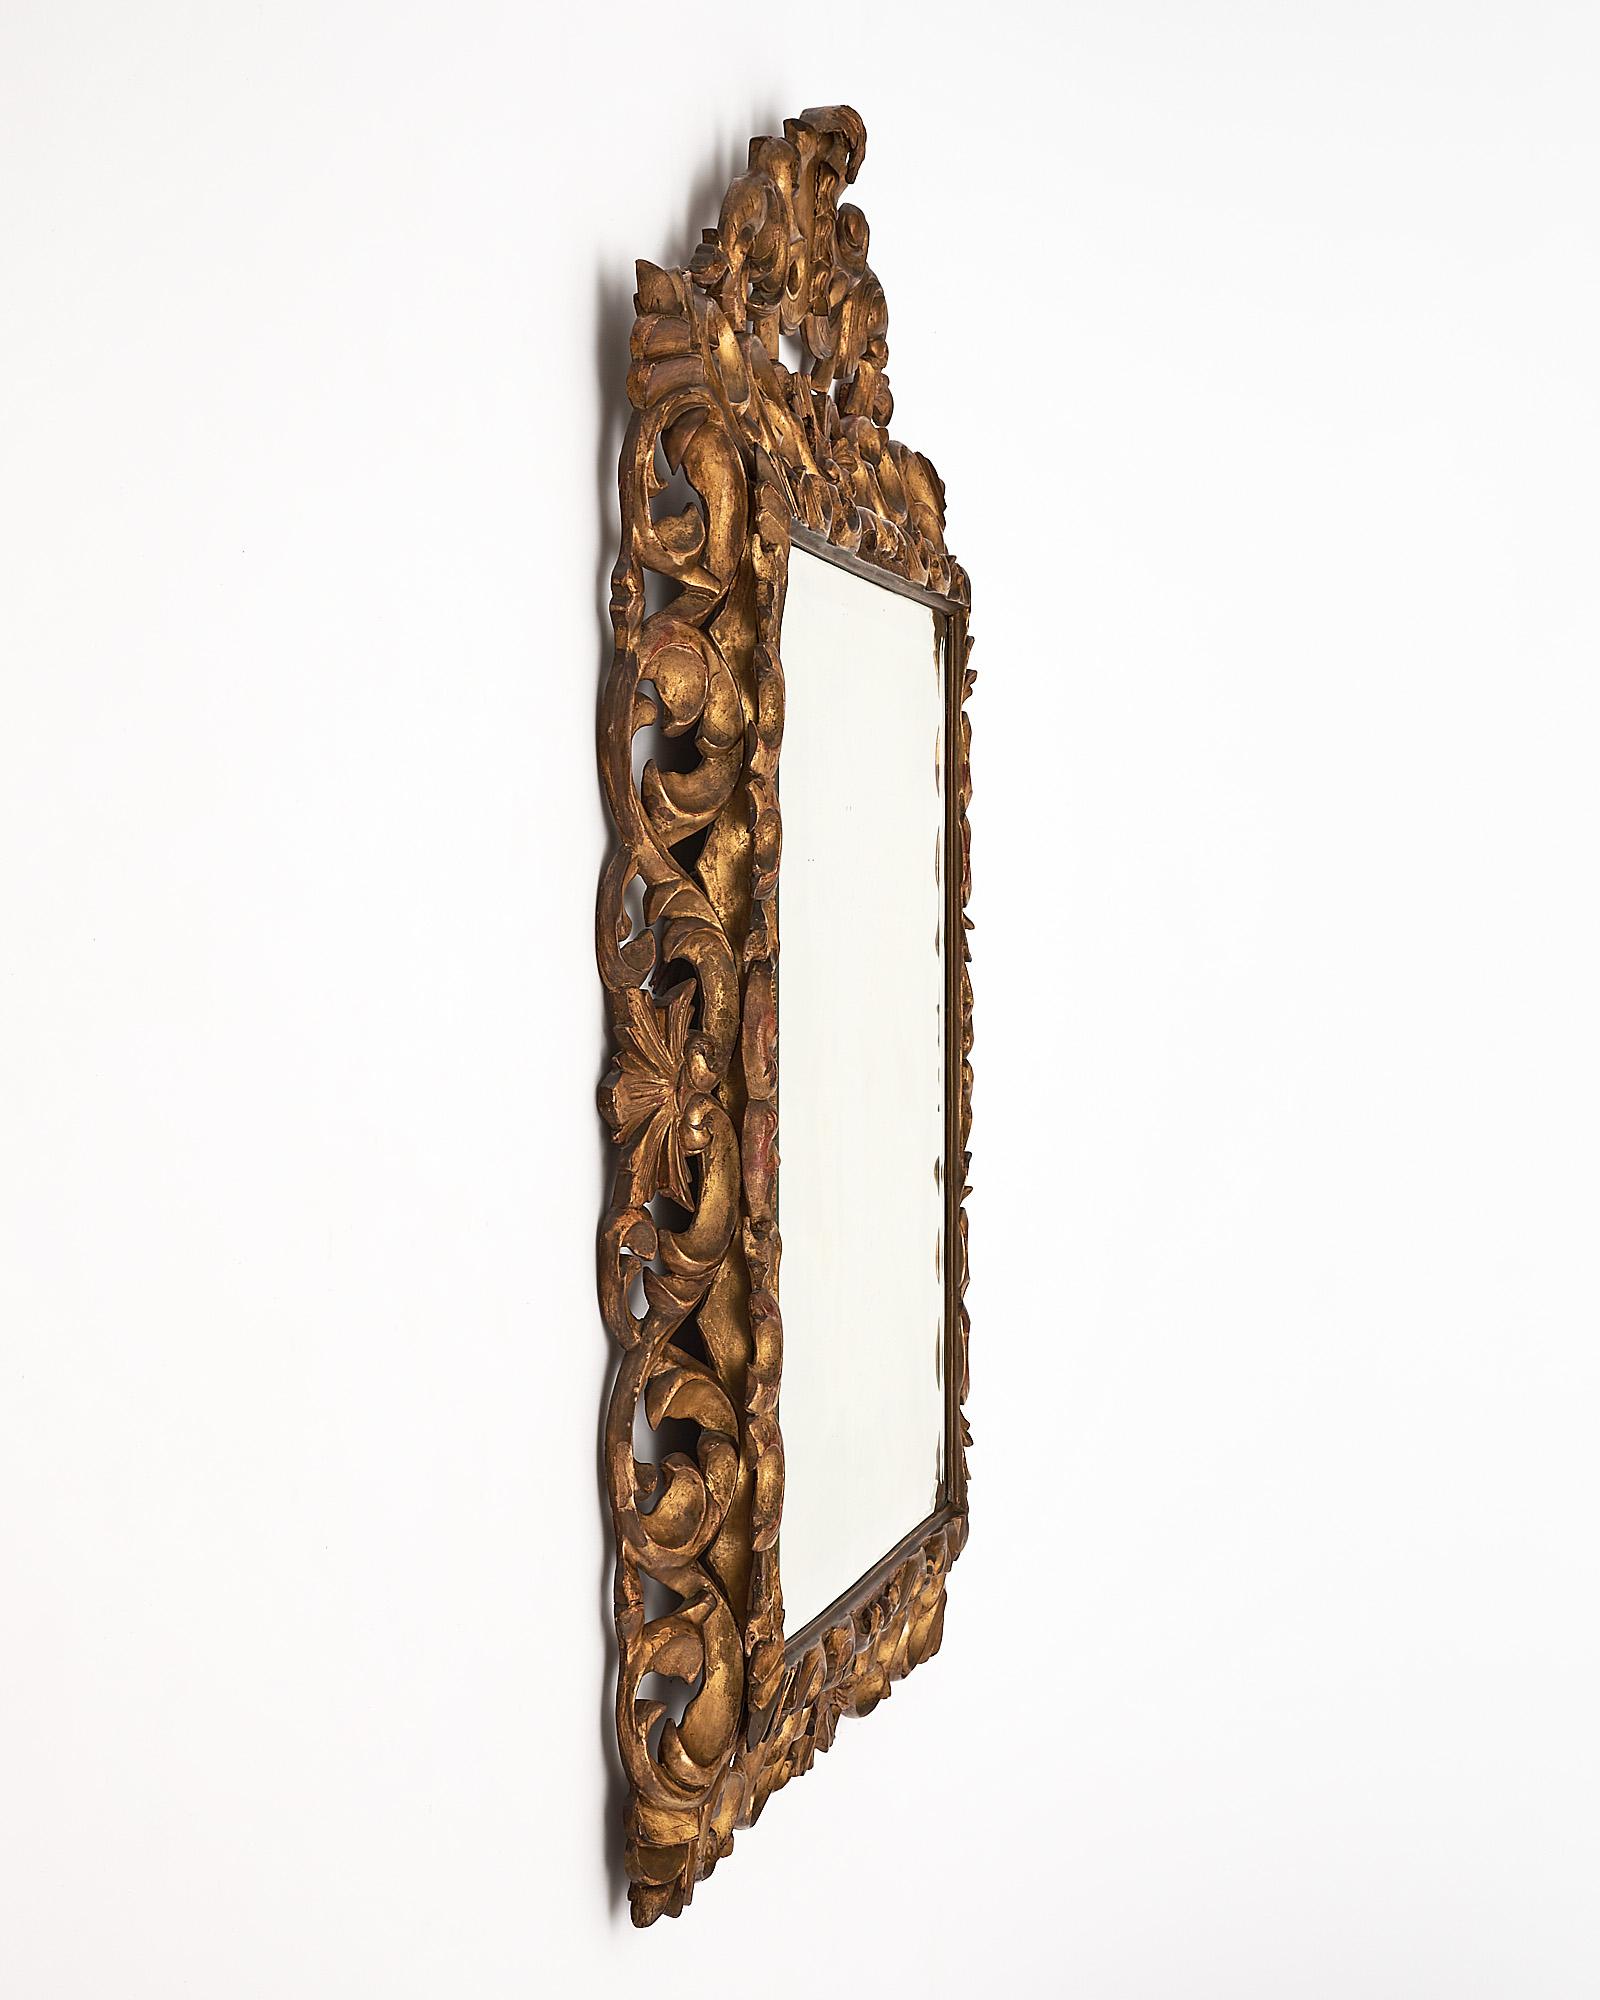 Mirror, French, from the Napoleon III period. This mirror is made of hand-carved wood with gold leafing throughout.